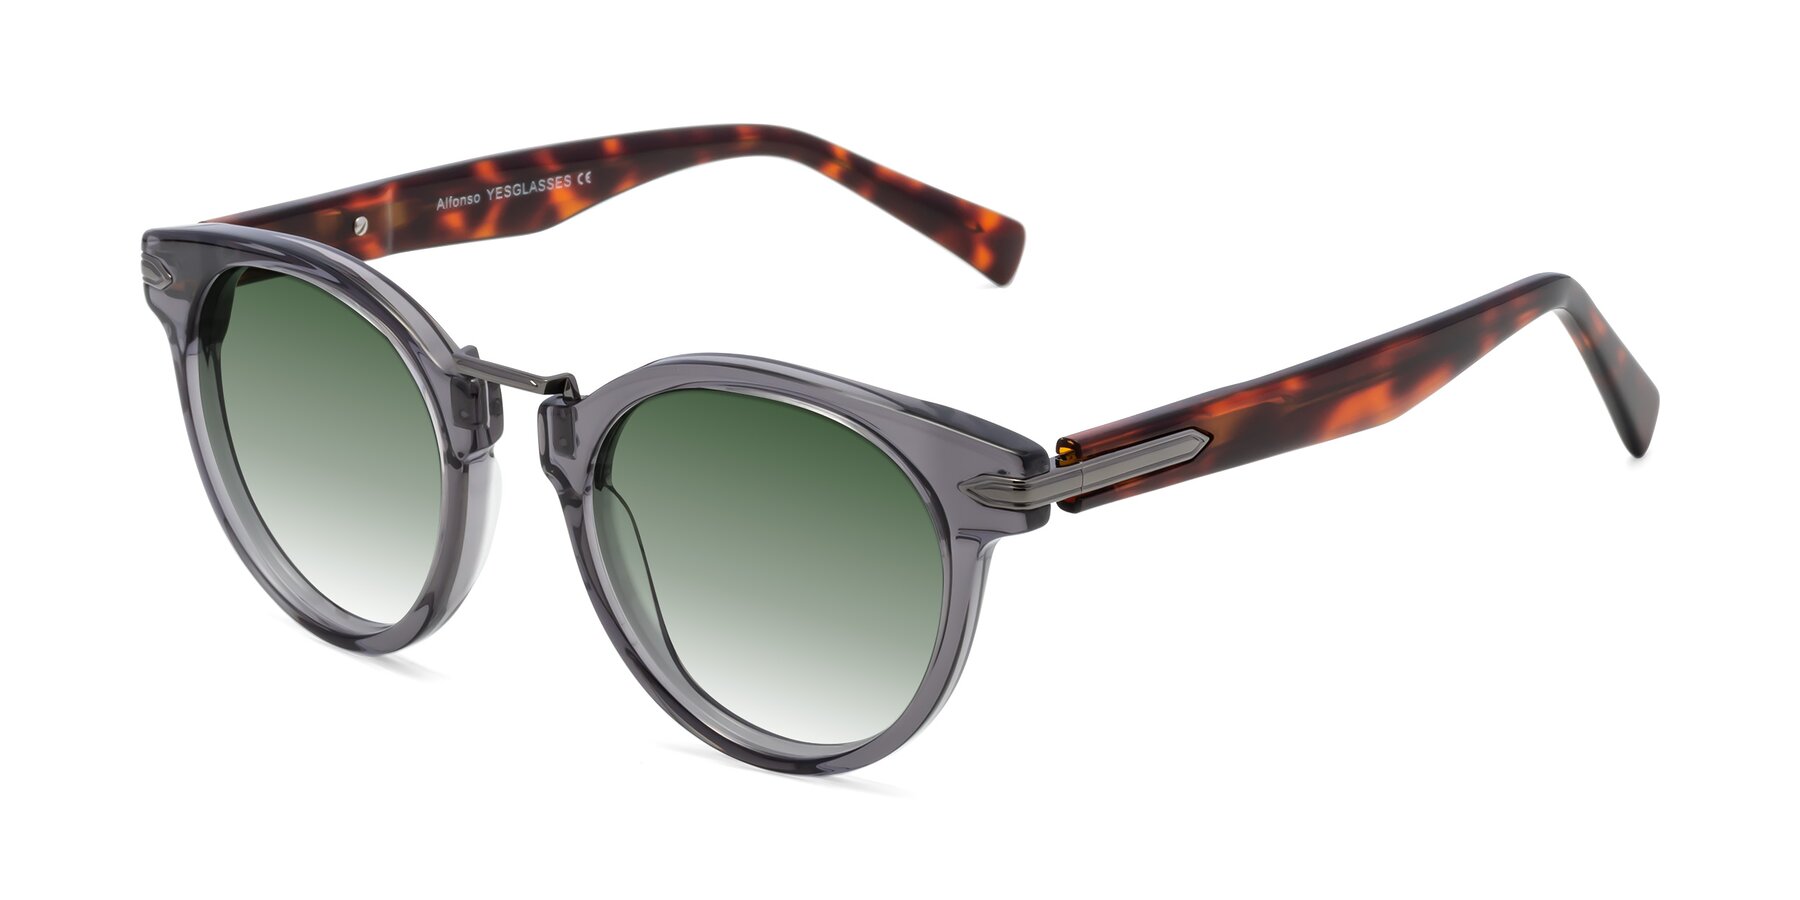 Angle of Alfonso in Gray /Tortoise with Green Gradient Lenses